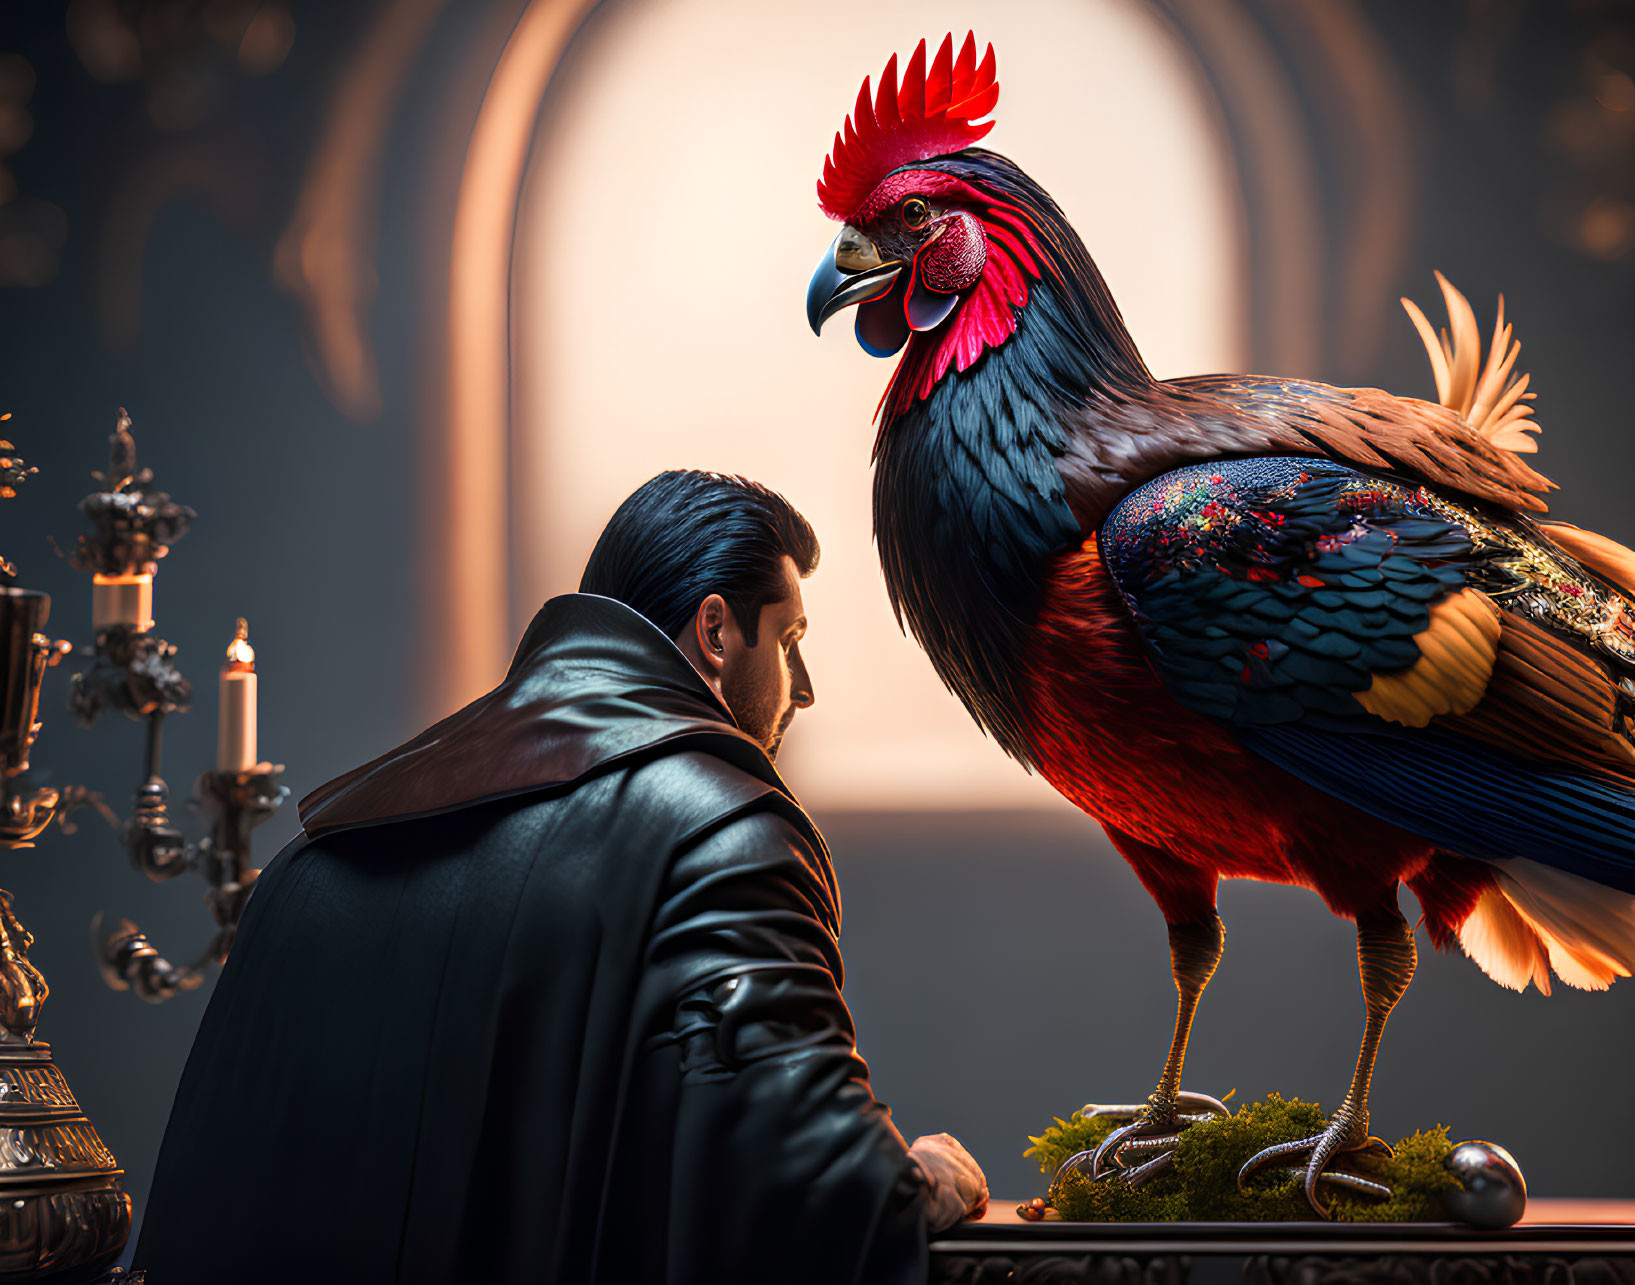 Man in Black Coat Confronts Rooster on Table with Candles